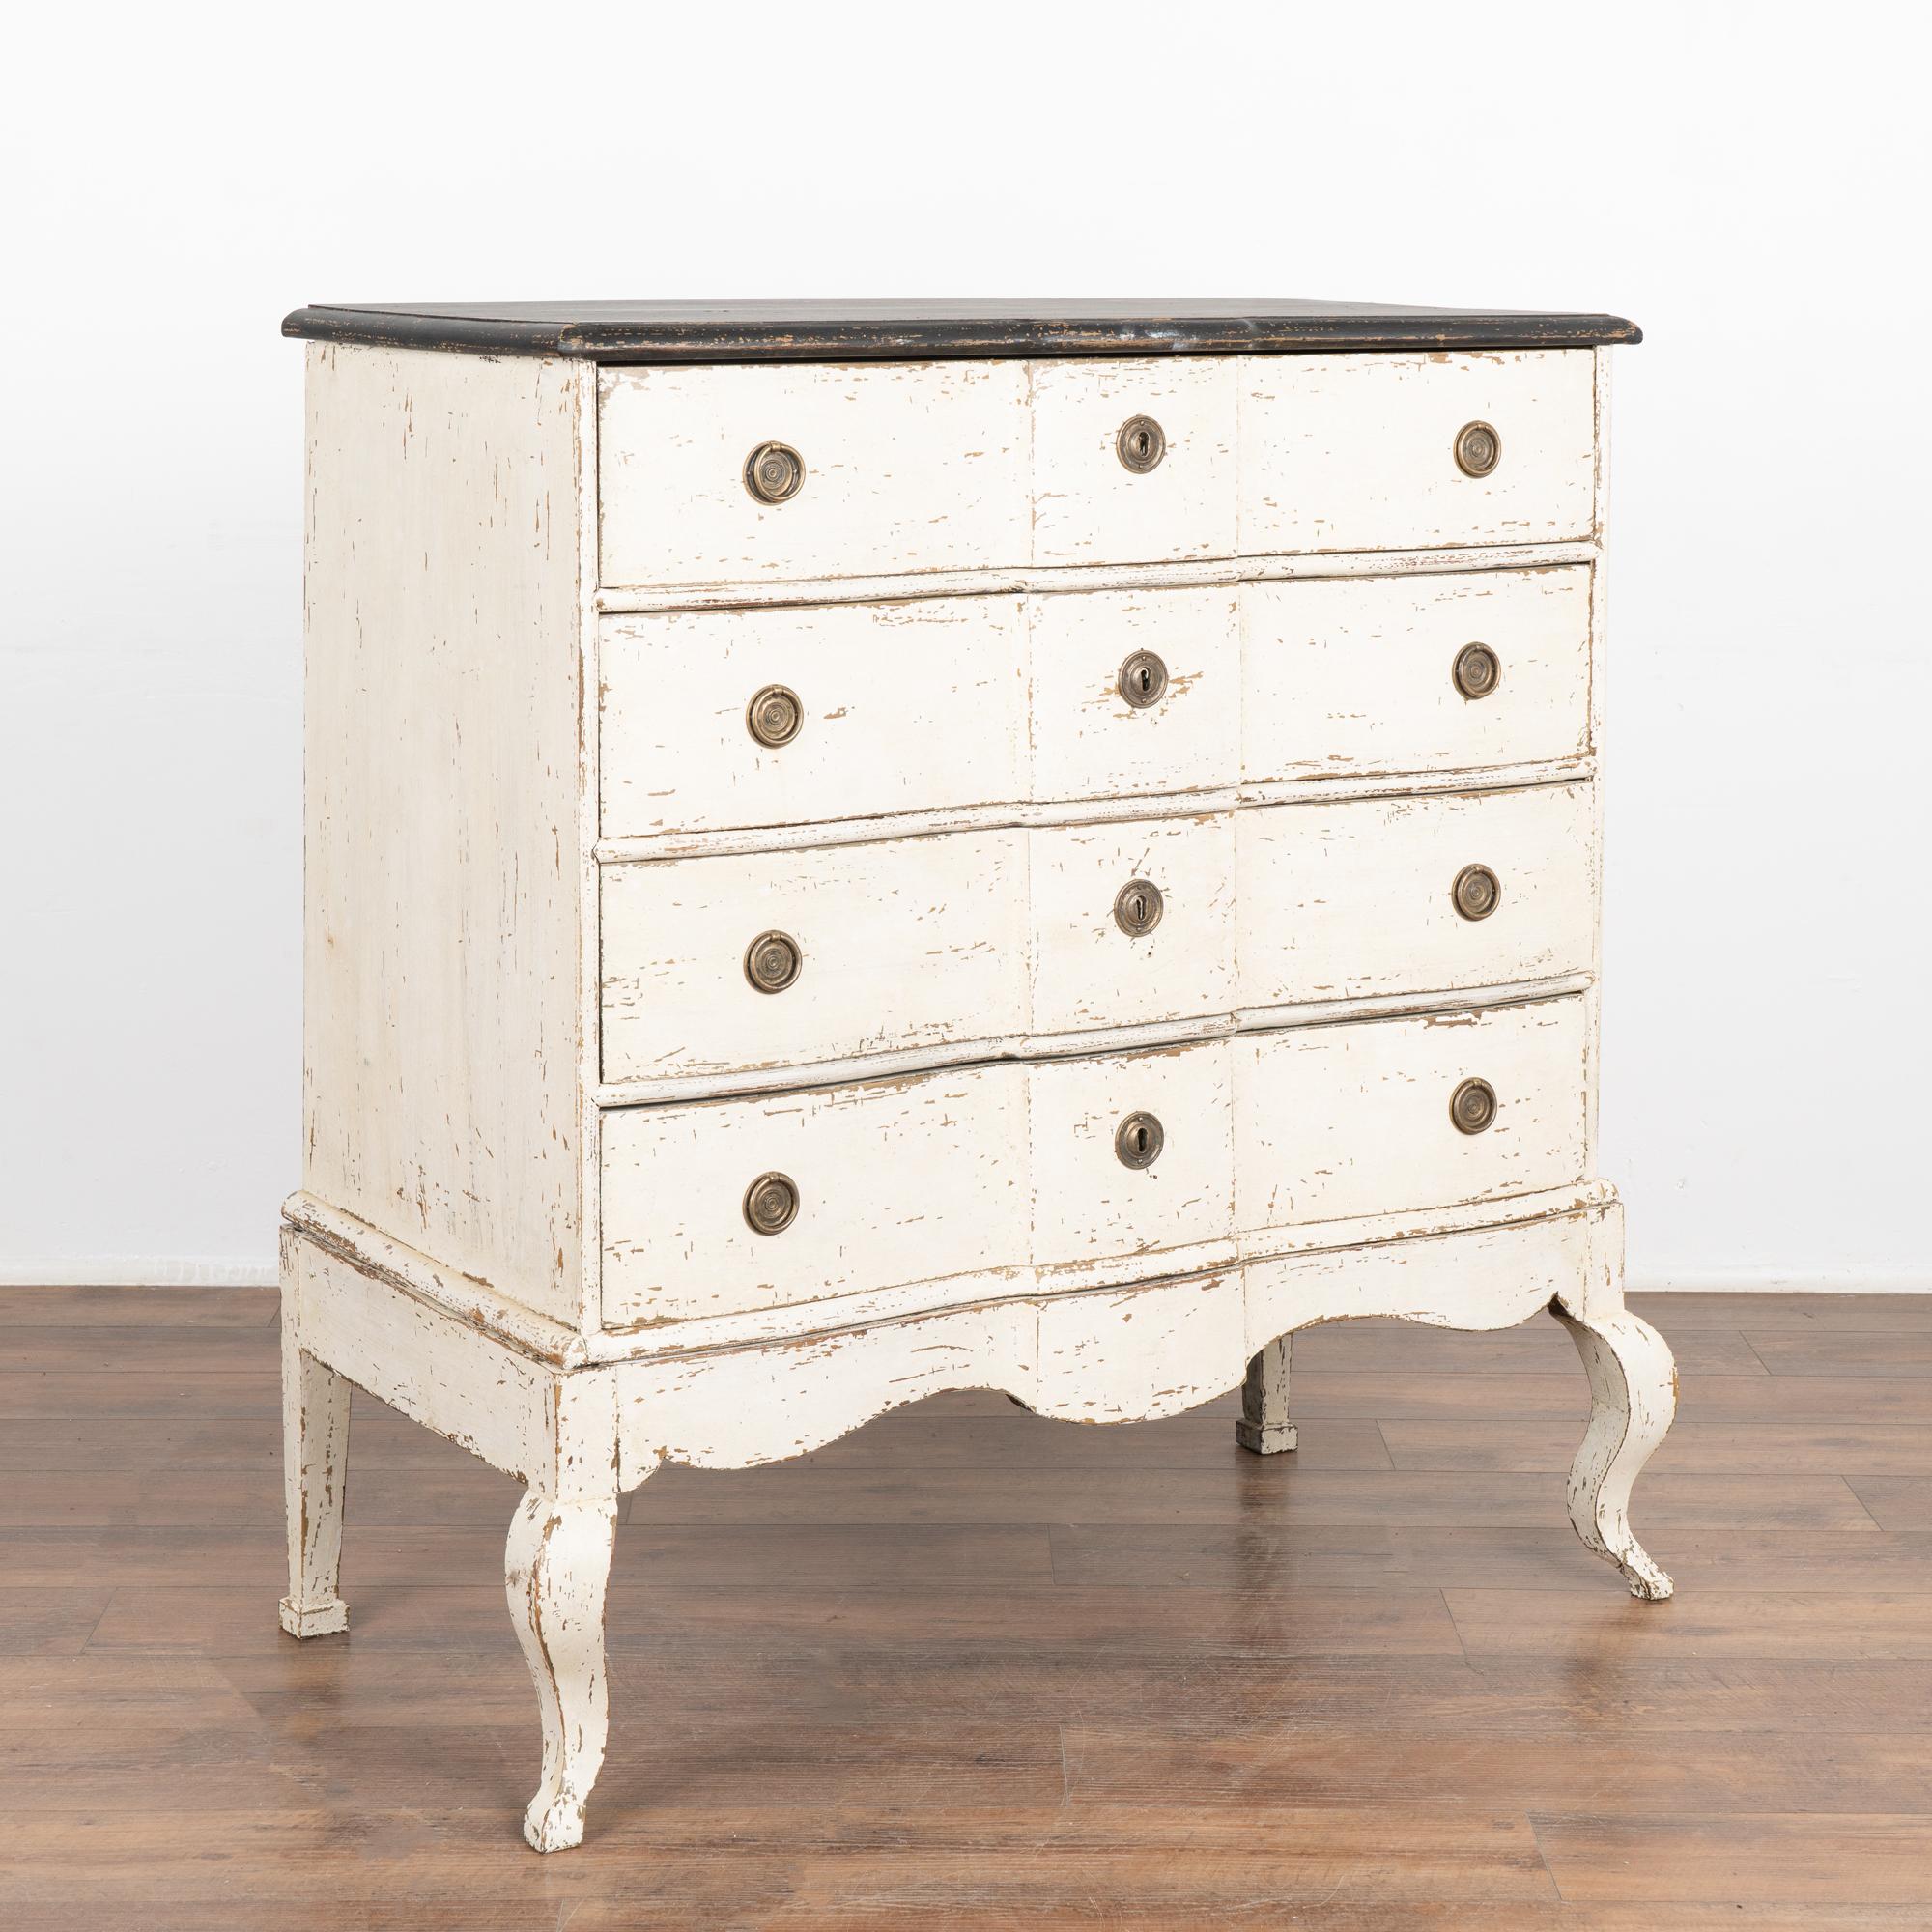 This antique rococo chest of drawers from Denmark features a serpentine front, brass hardware pulls and an exceptional (newer) white painted finish with contrasting black painted top.
Curves accentuate the skirt and front cabriolet legs. 
The